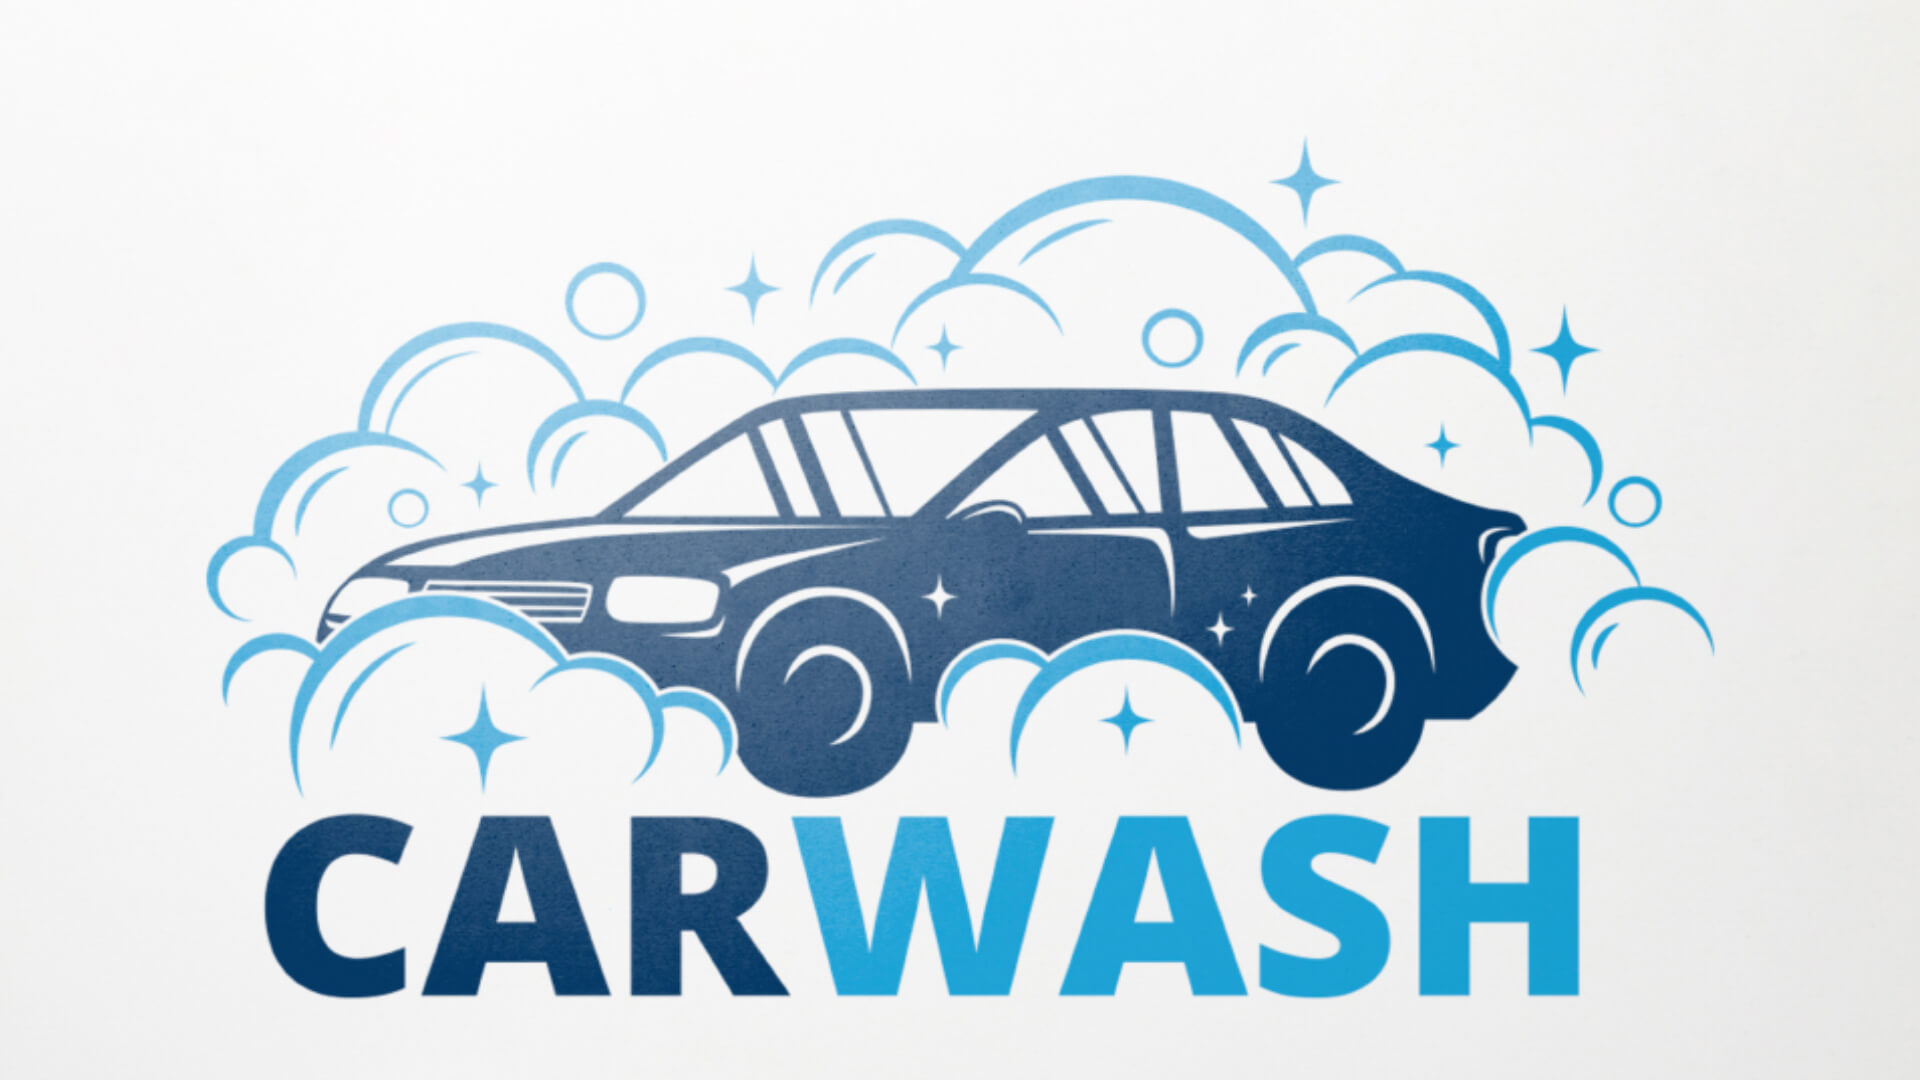 Top 18 Innovative Car Wash Companies to Watch Out for in 2021 and Beyond